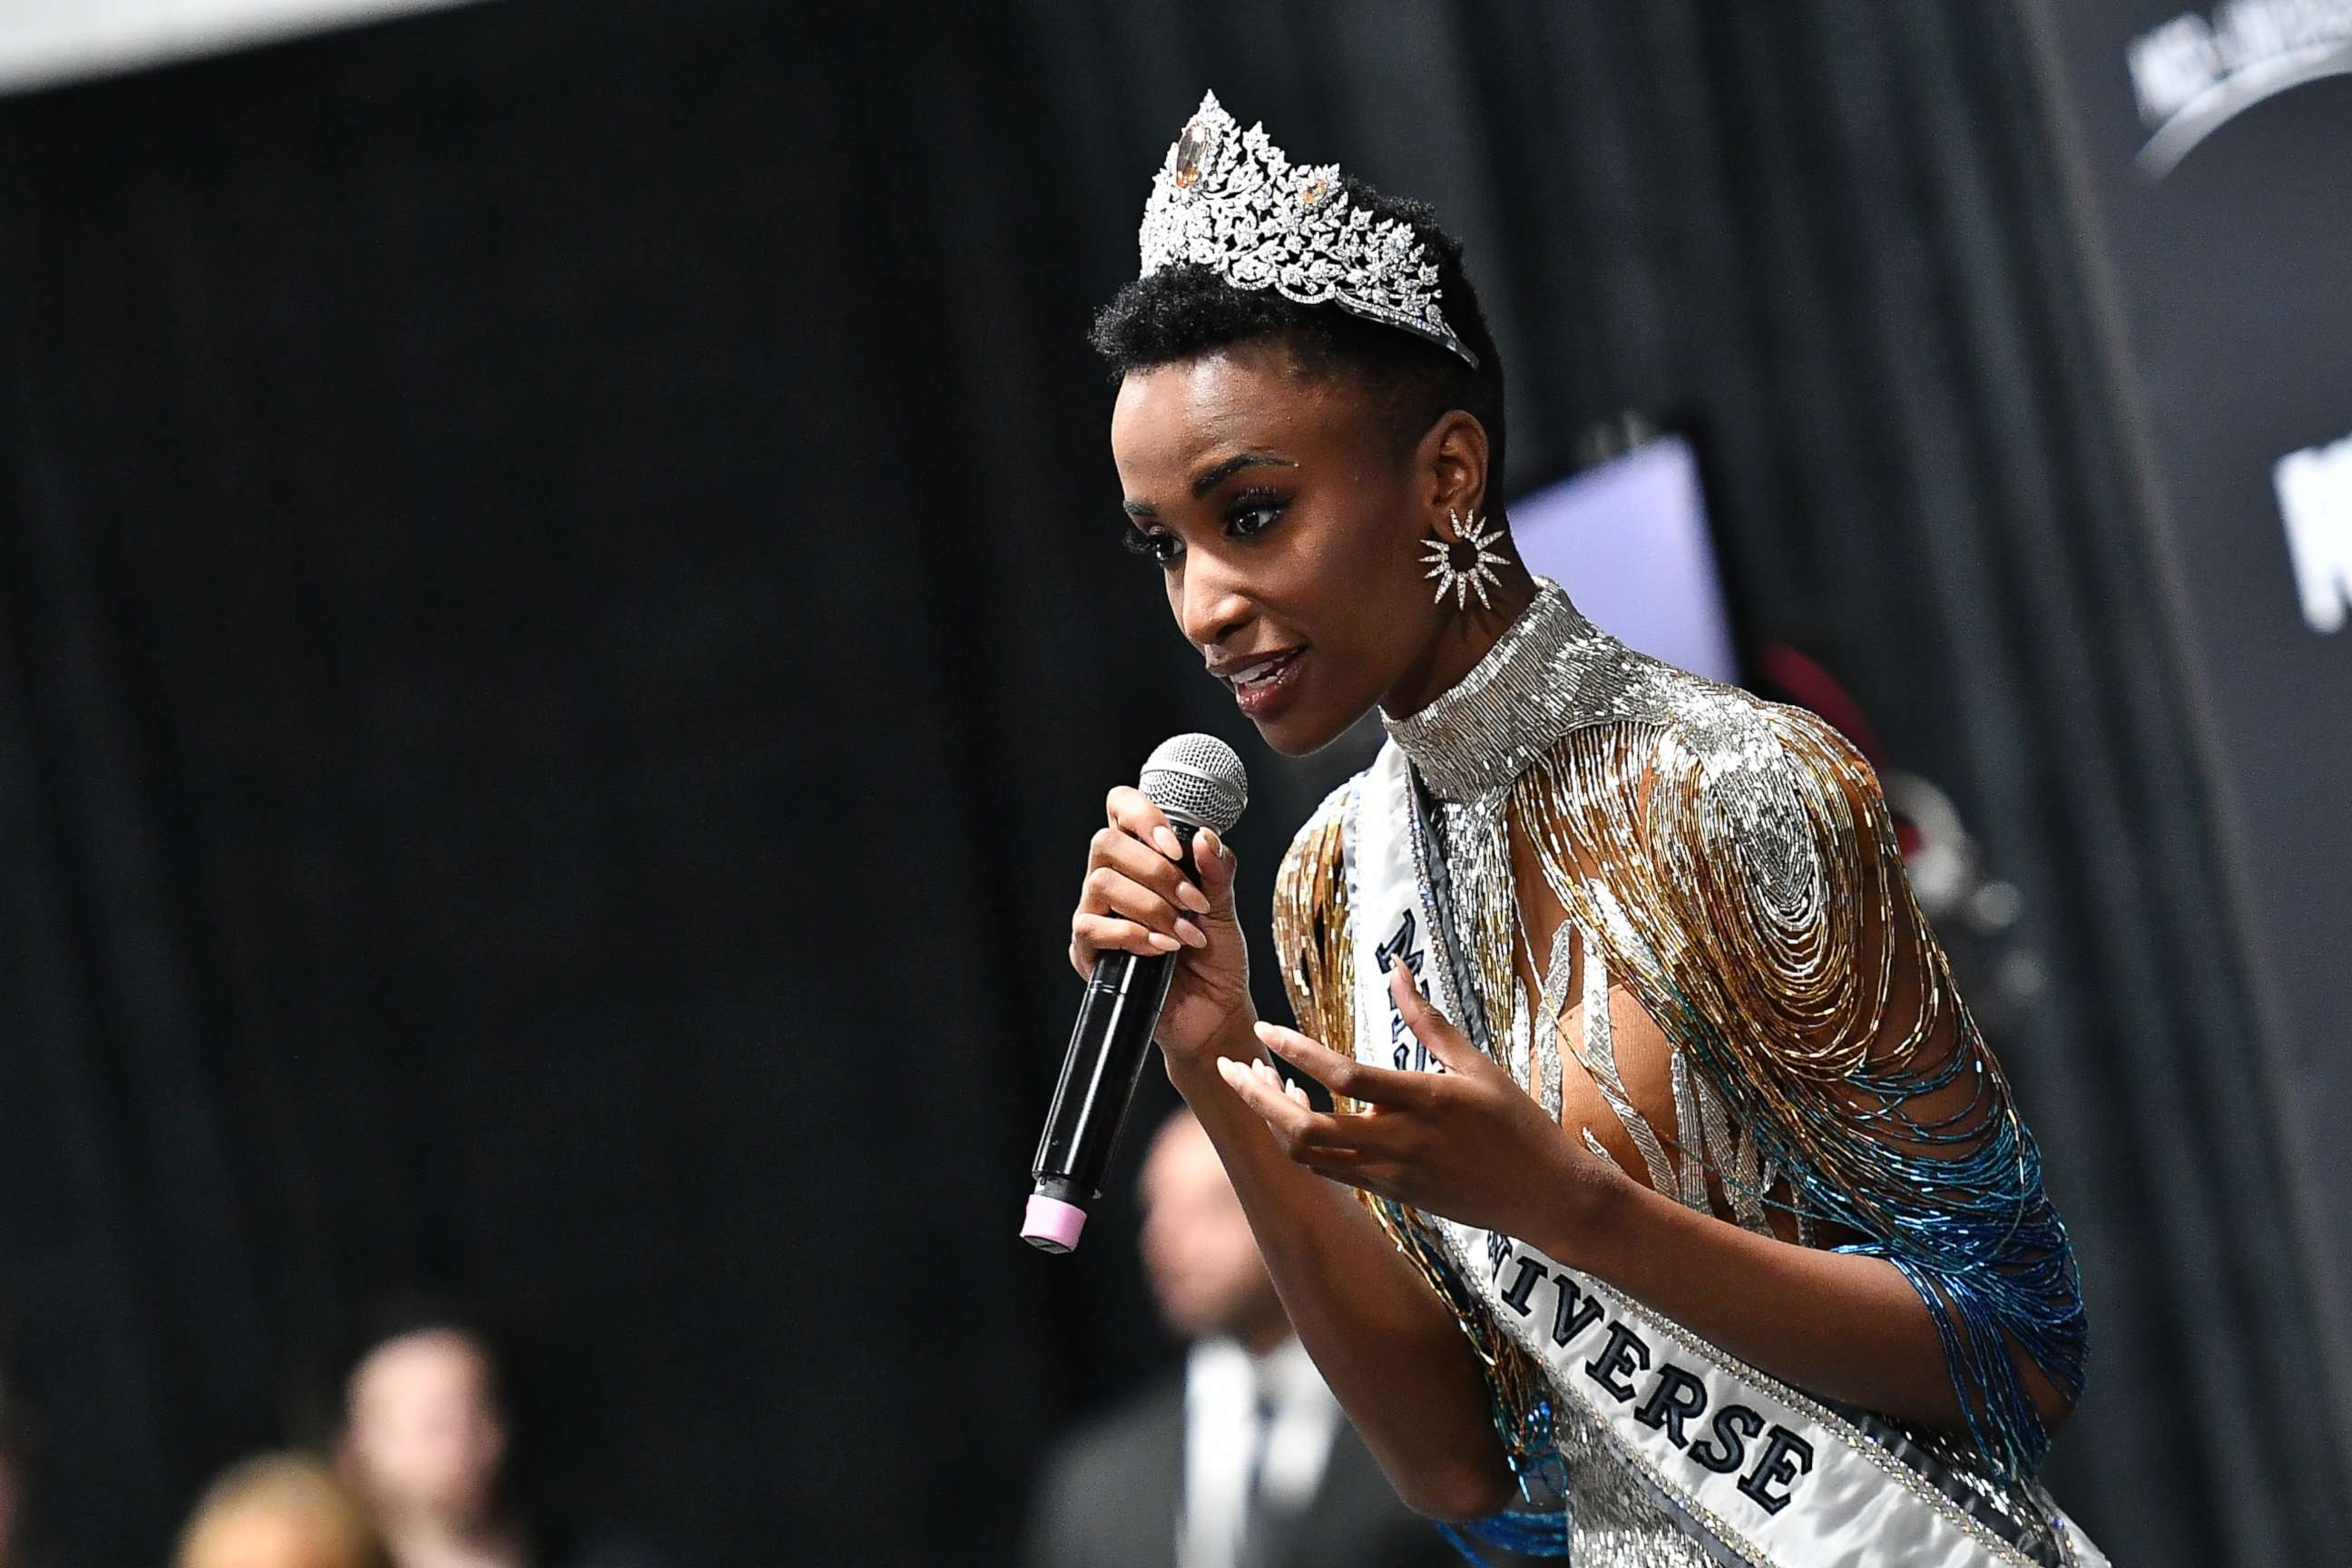 PHOTO: Miss Universe 2019 Zozibini Tunzi, of South Africa, appears at a press conference following the 2019 Miss Universe Pageant at Tyler Perry Studios, Dec. 8, 2019 in Atlanta.